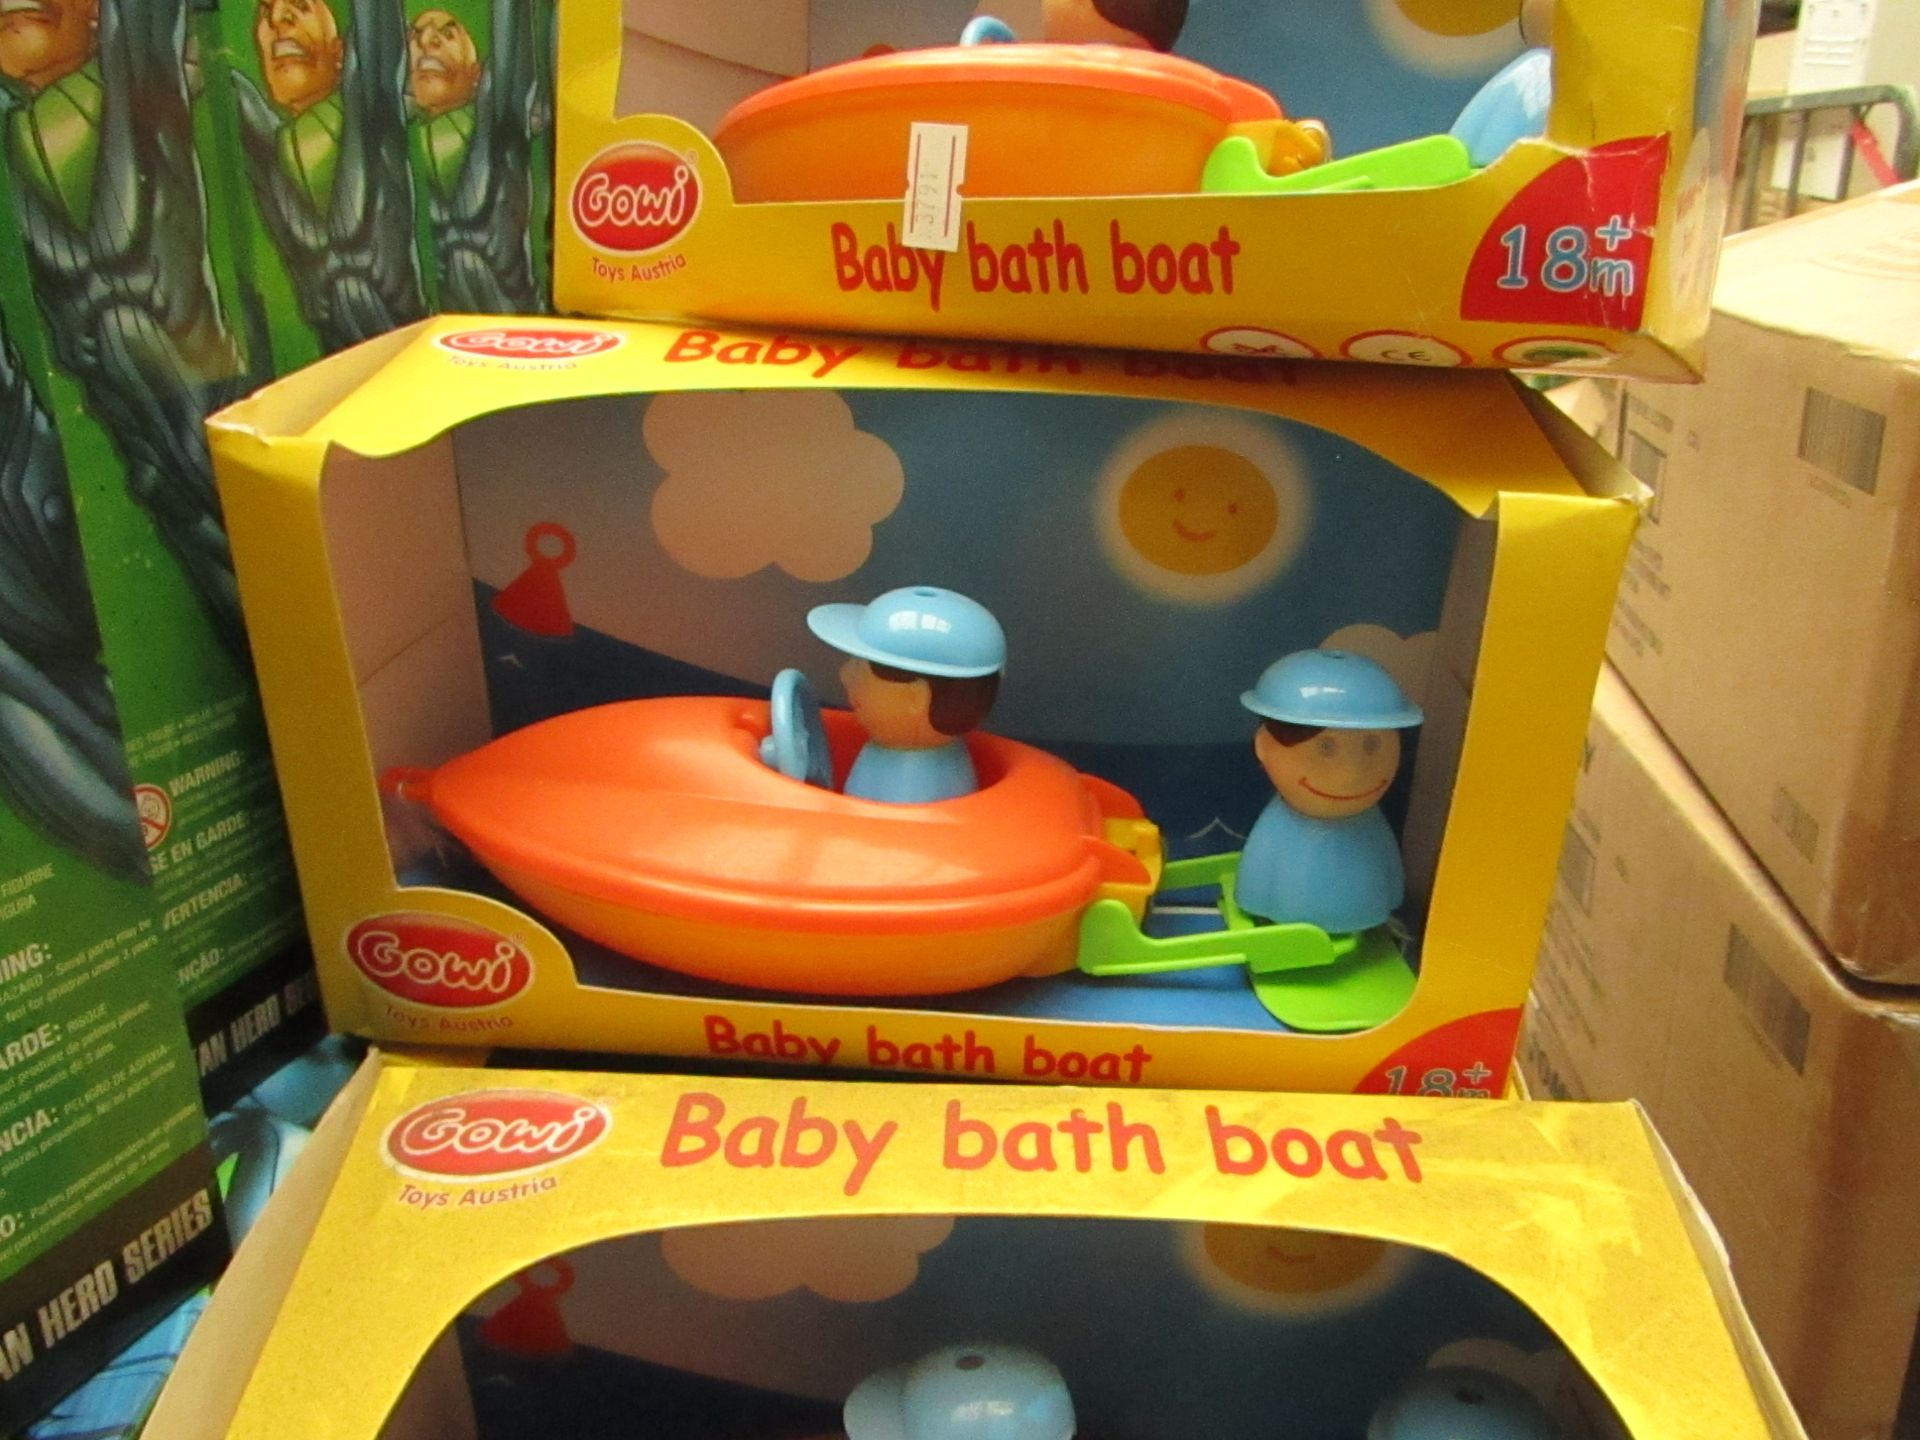 Gowi - Baby Bath Boat Toy - Boxed.